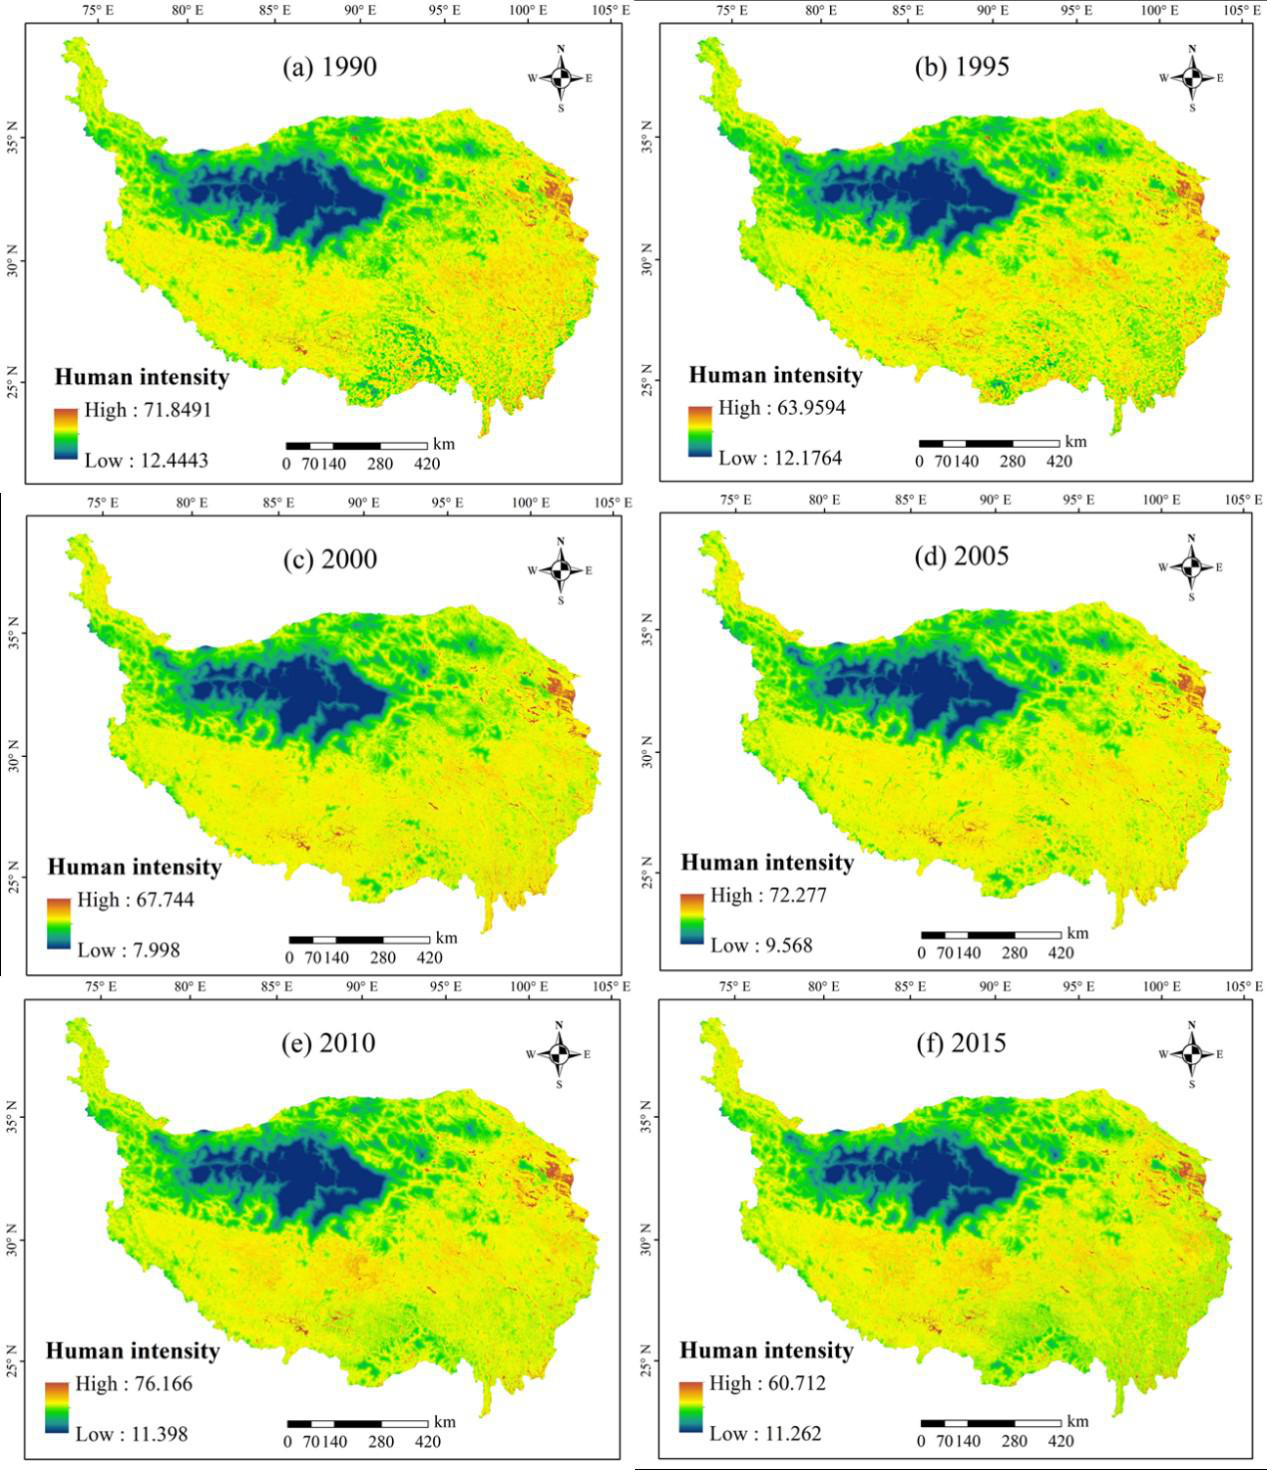 1 km grid datasets of human activity intensity in agricultural and pastoral areas of the Qinghai-Tibet Plateau